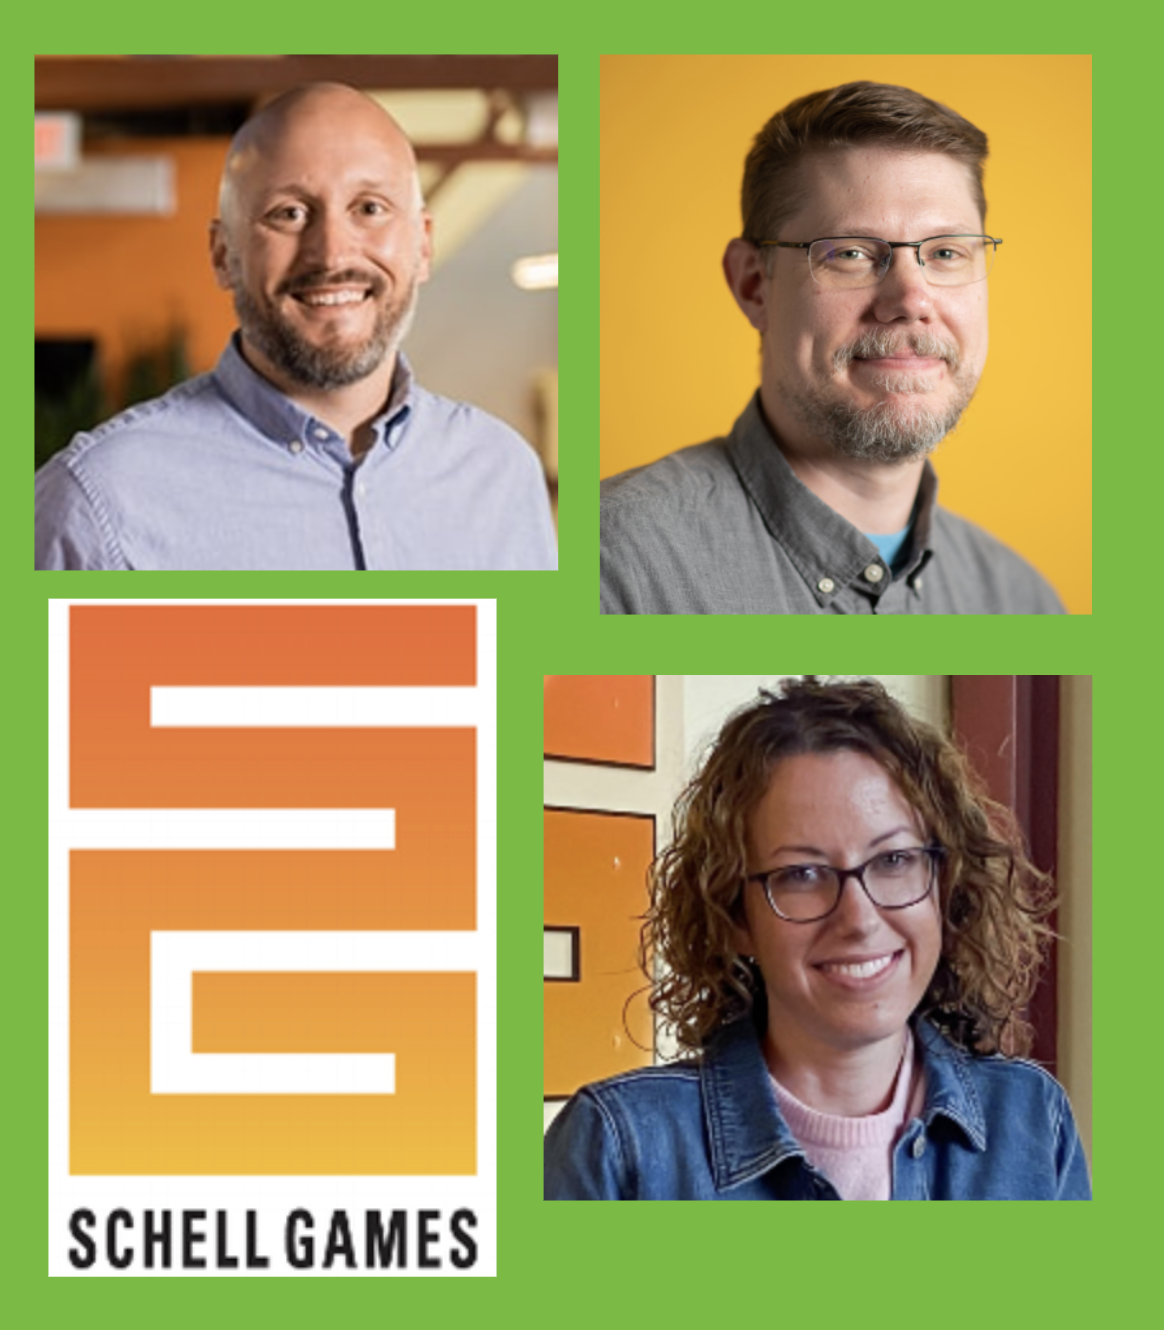 Schell Games  Pittsburgh PA